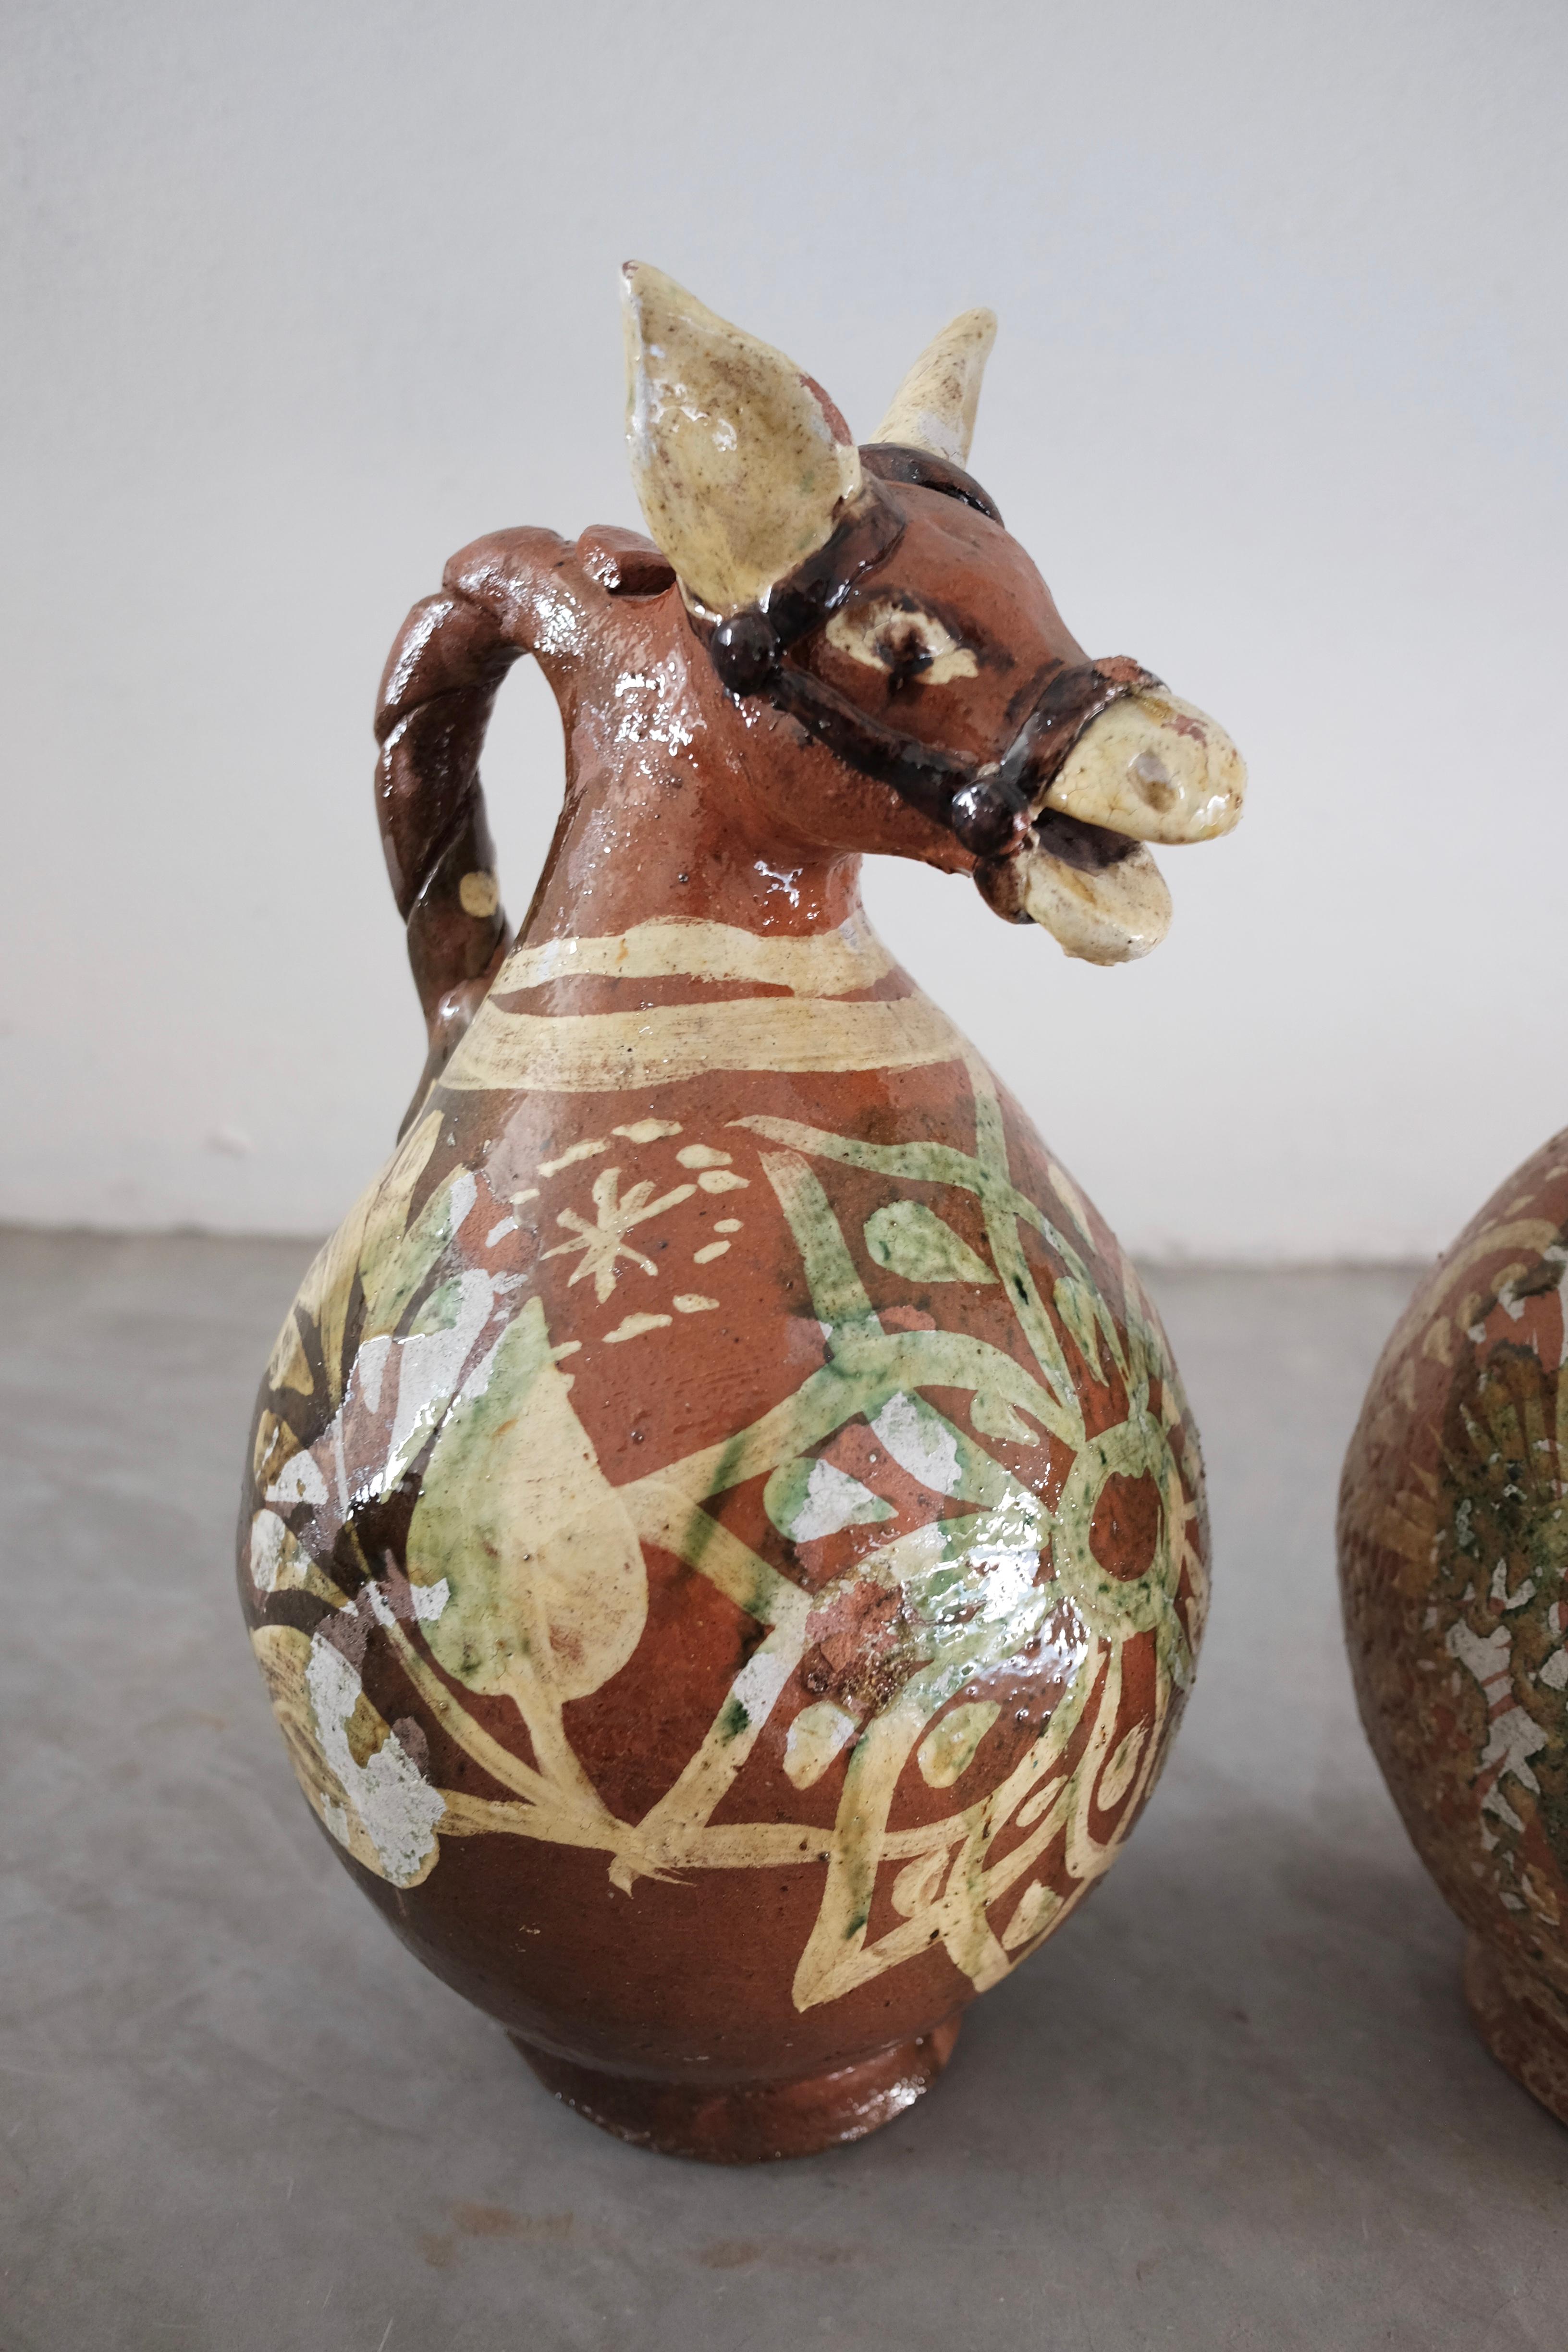 Pair of ceramic horse pitchers once used to serve pulque (fermented agave beverage). Glazed and painted.